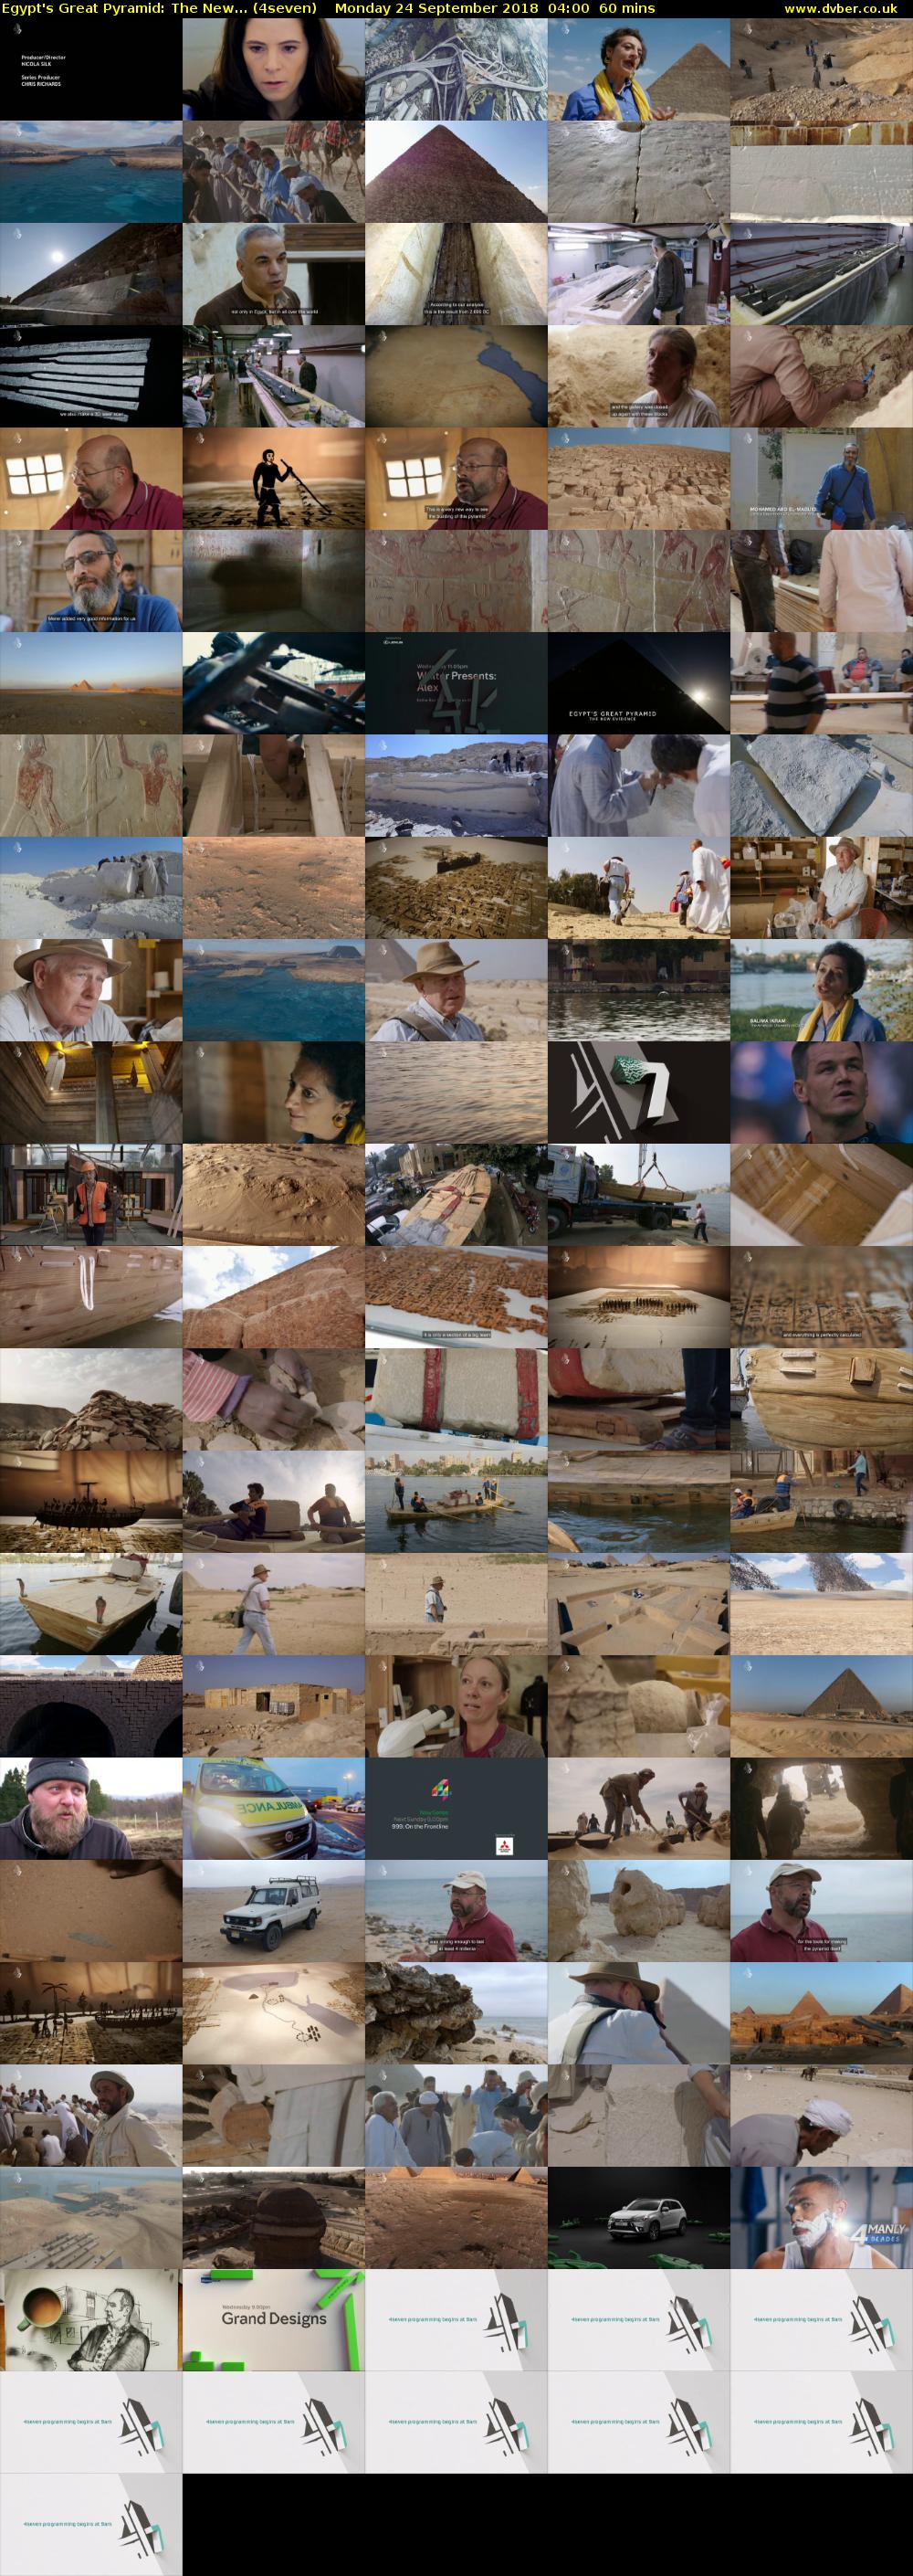 Egypt's Great Pyramid: The New... (4seven) Monday 24 September 2018 04:00 - 05:00